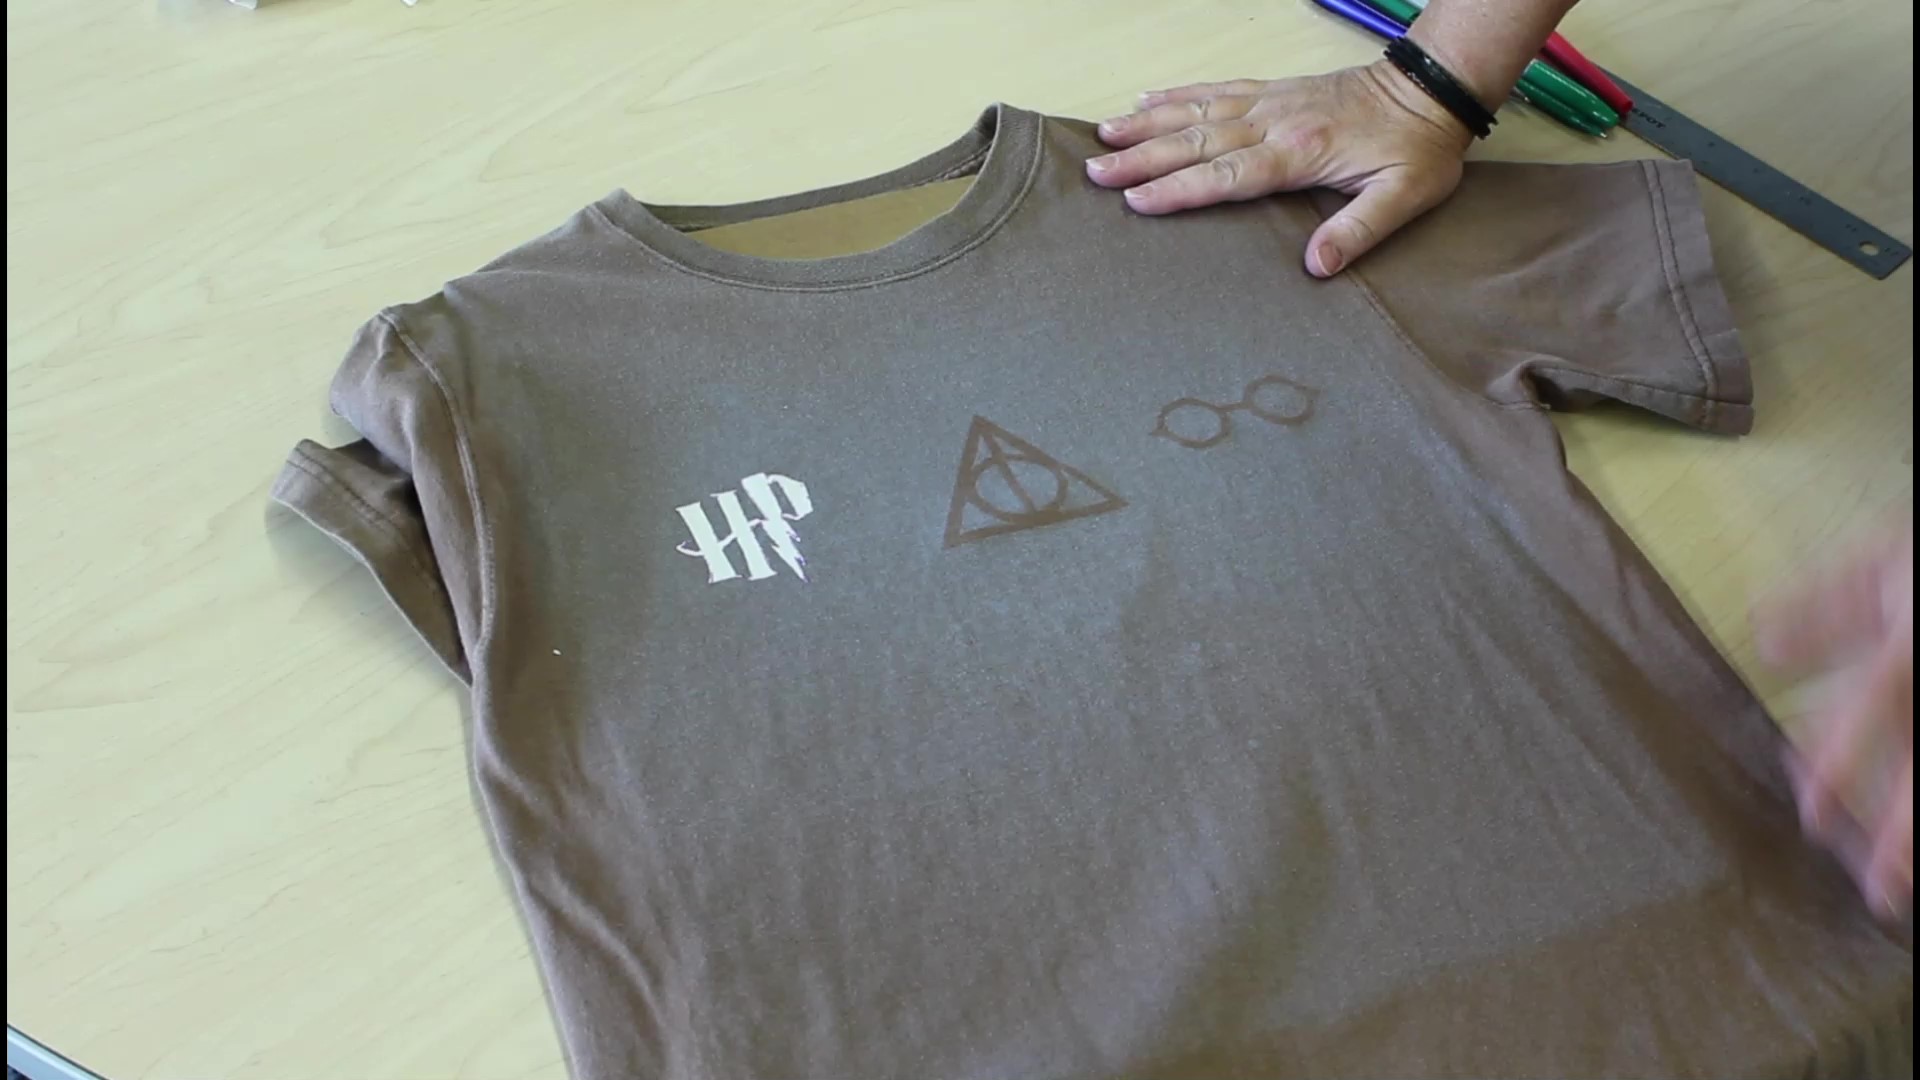 Picture of partially bleached shirt with Harry Potter designs.